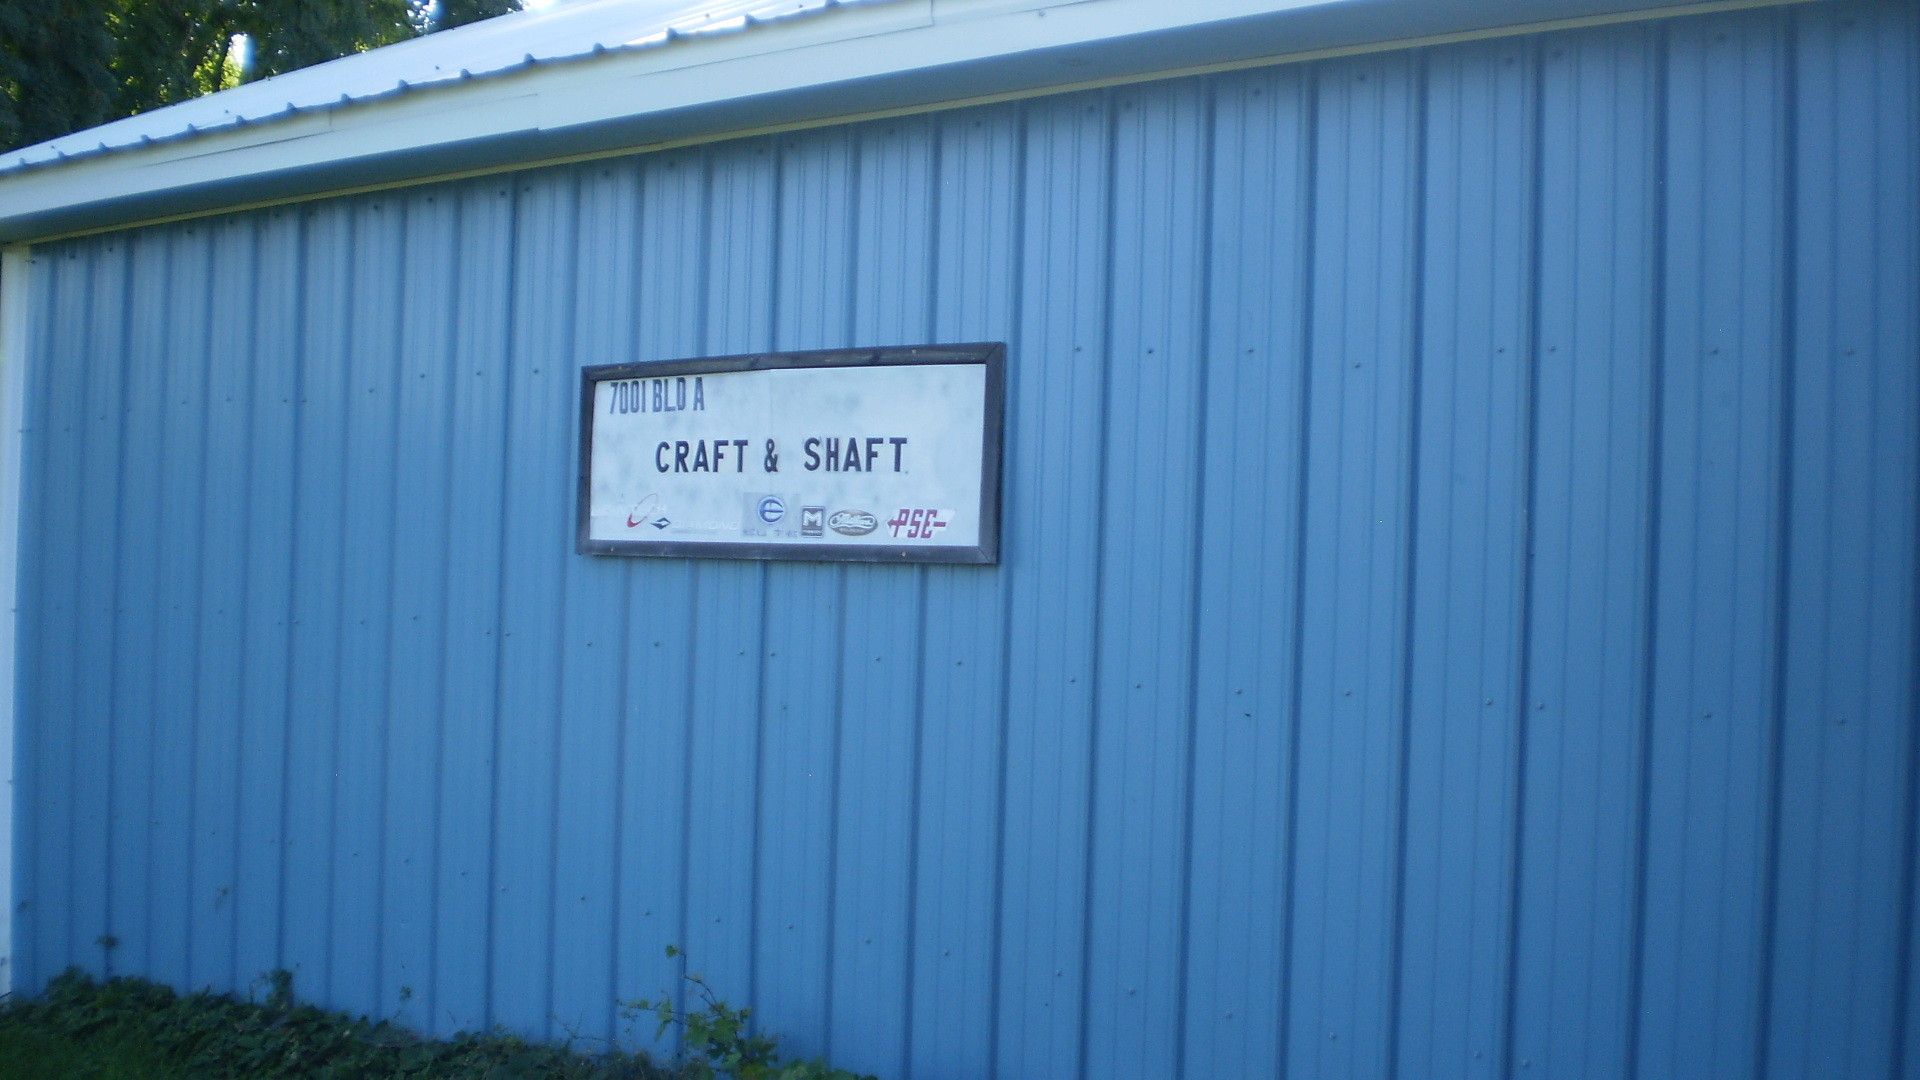 Craft and Shaft Store Front, 7001 Snell Hill Road, Bath New York 14810